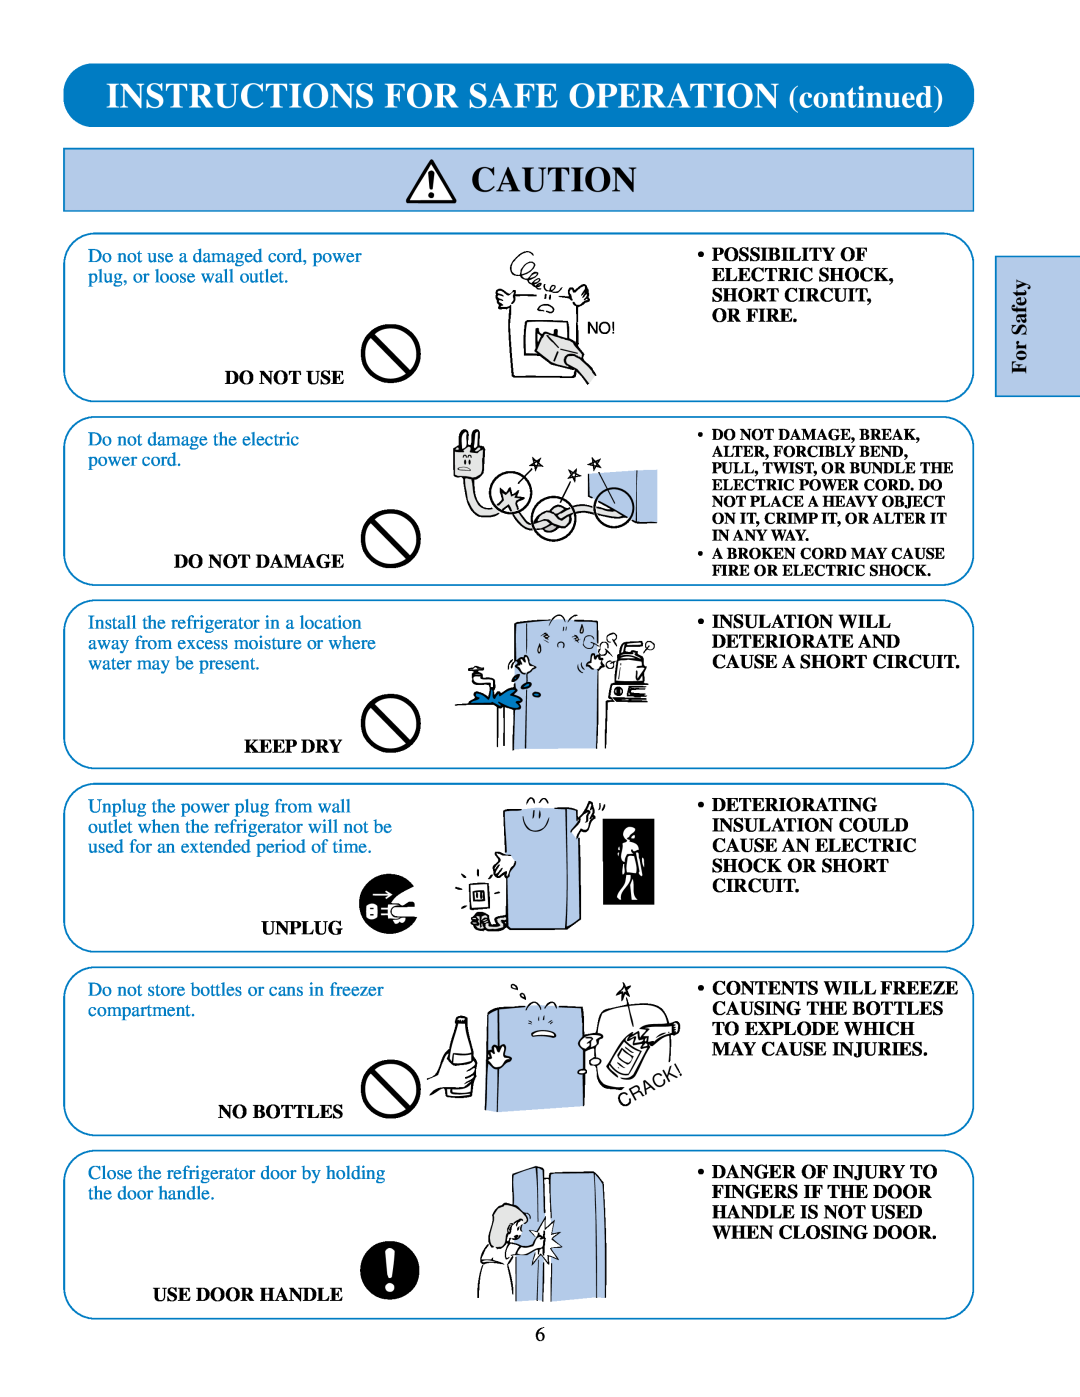 GE TFJ20JA INSTRUCTIONS FOR SAFE OPERATION continued, For Safety, Do not use a damaged cord, power, the door handle 